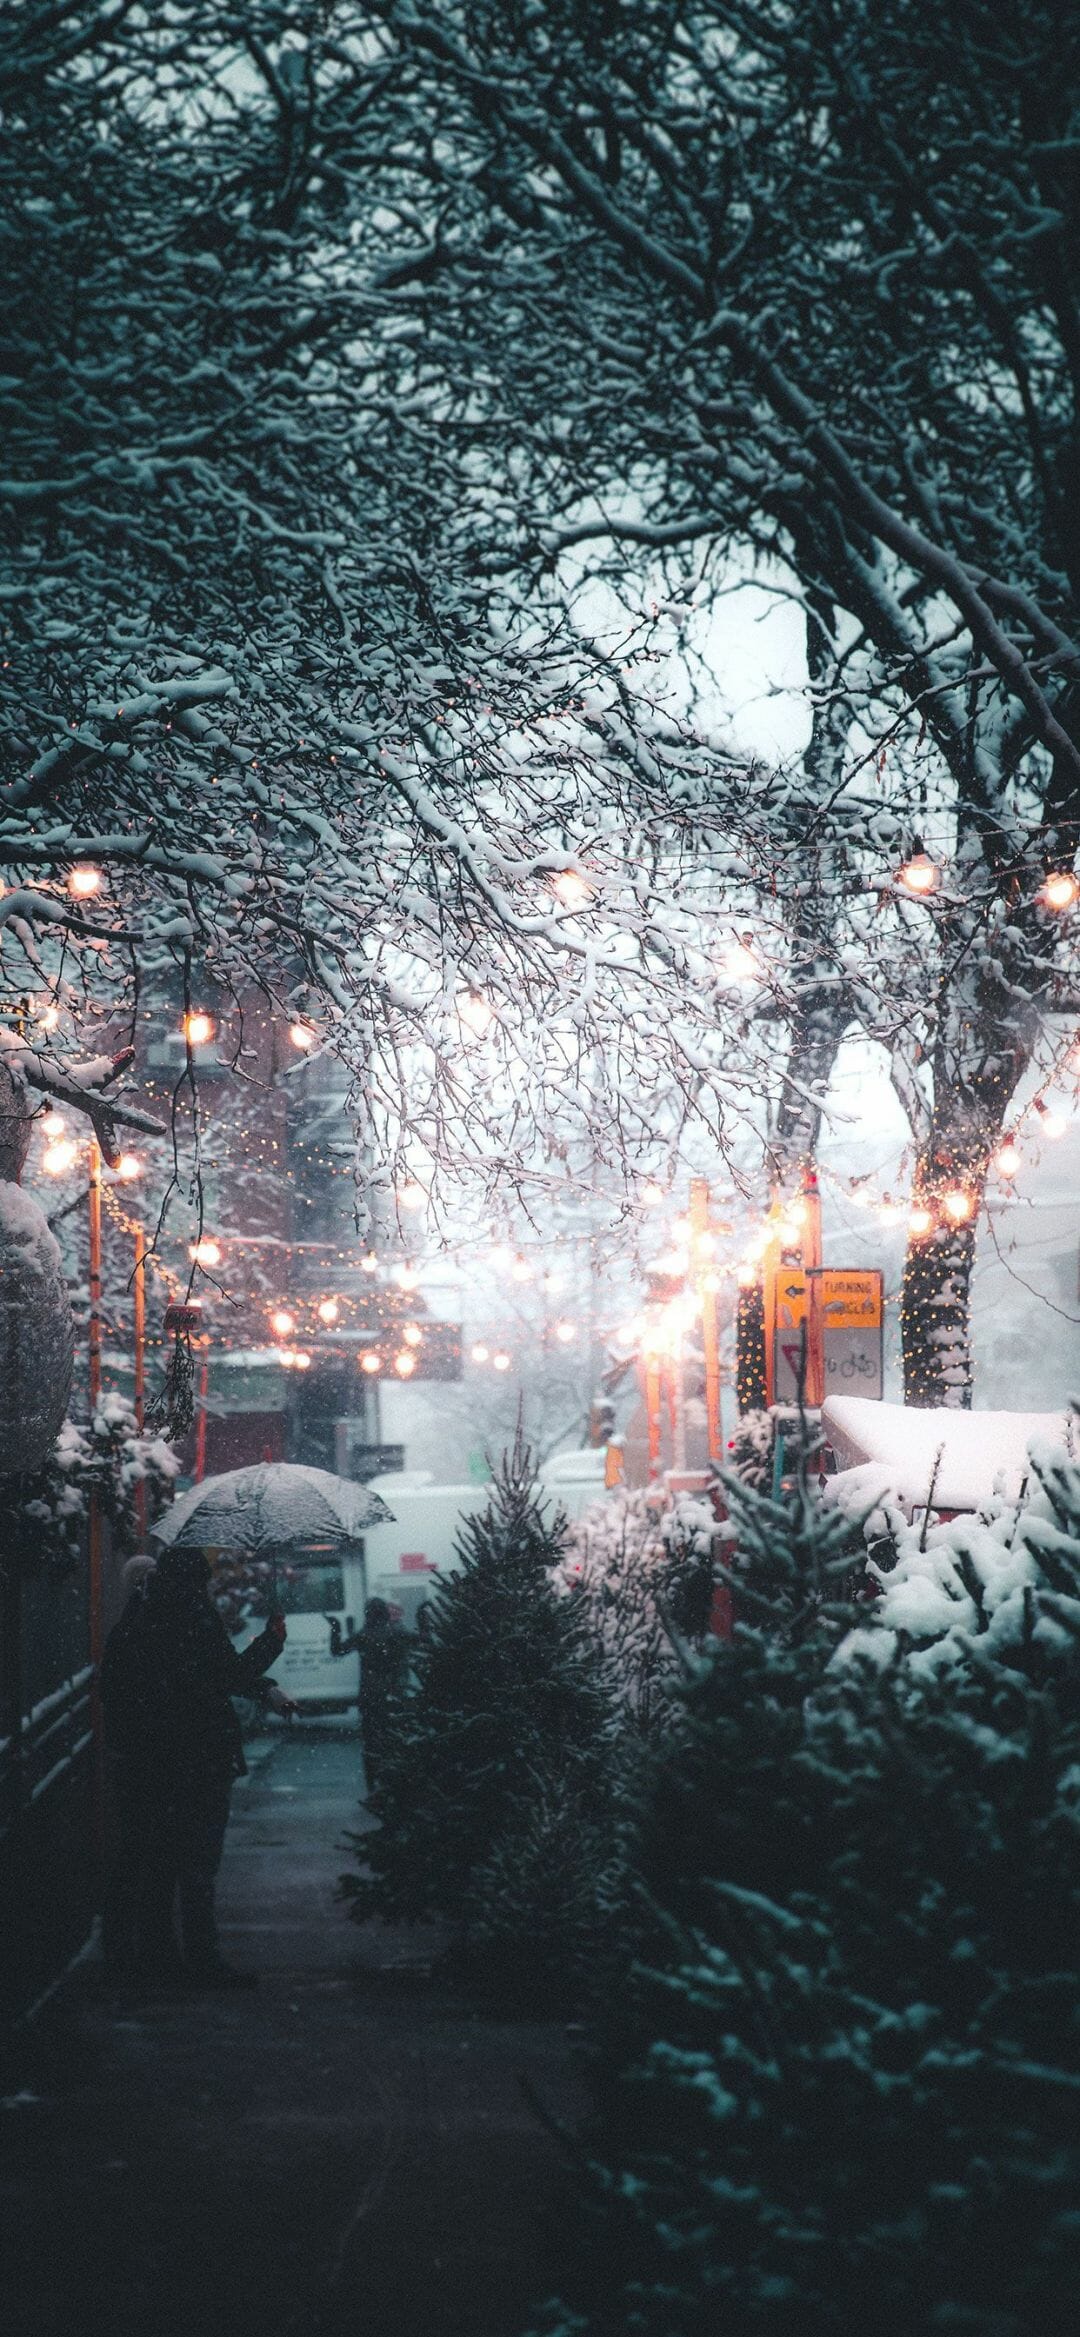 A street with trees and lights on them - Snow